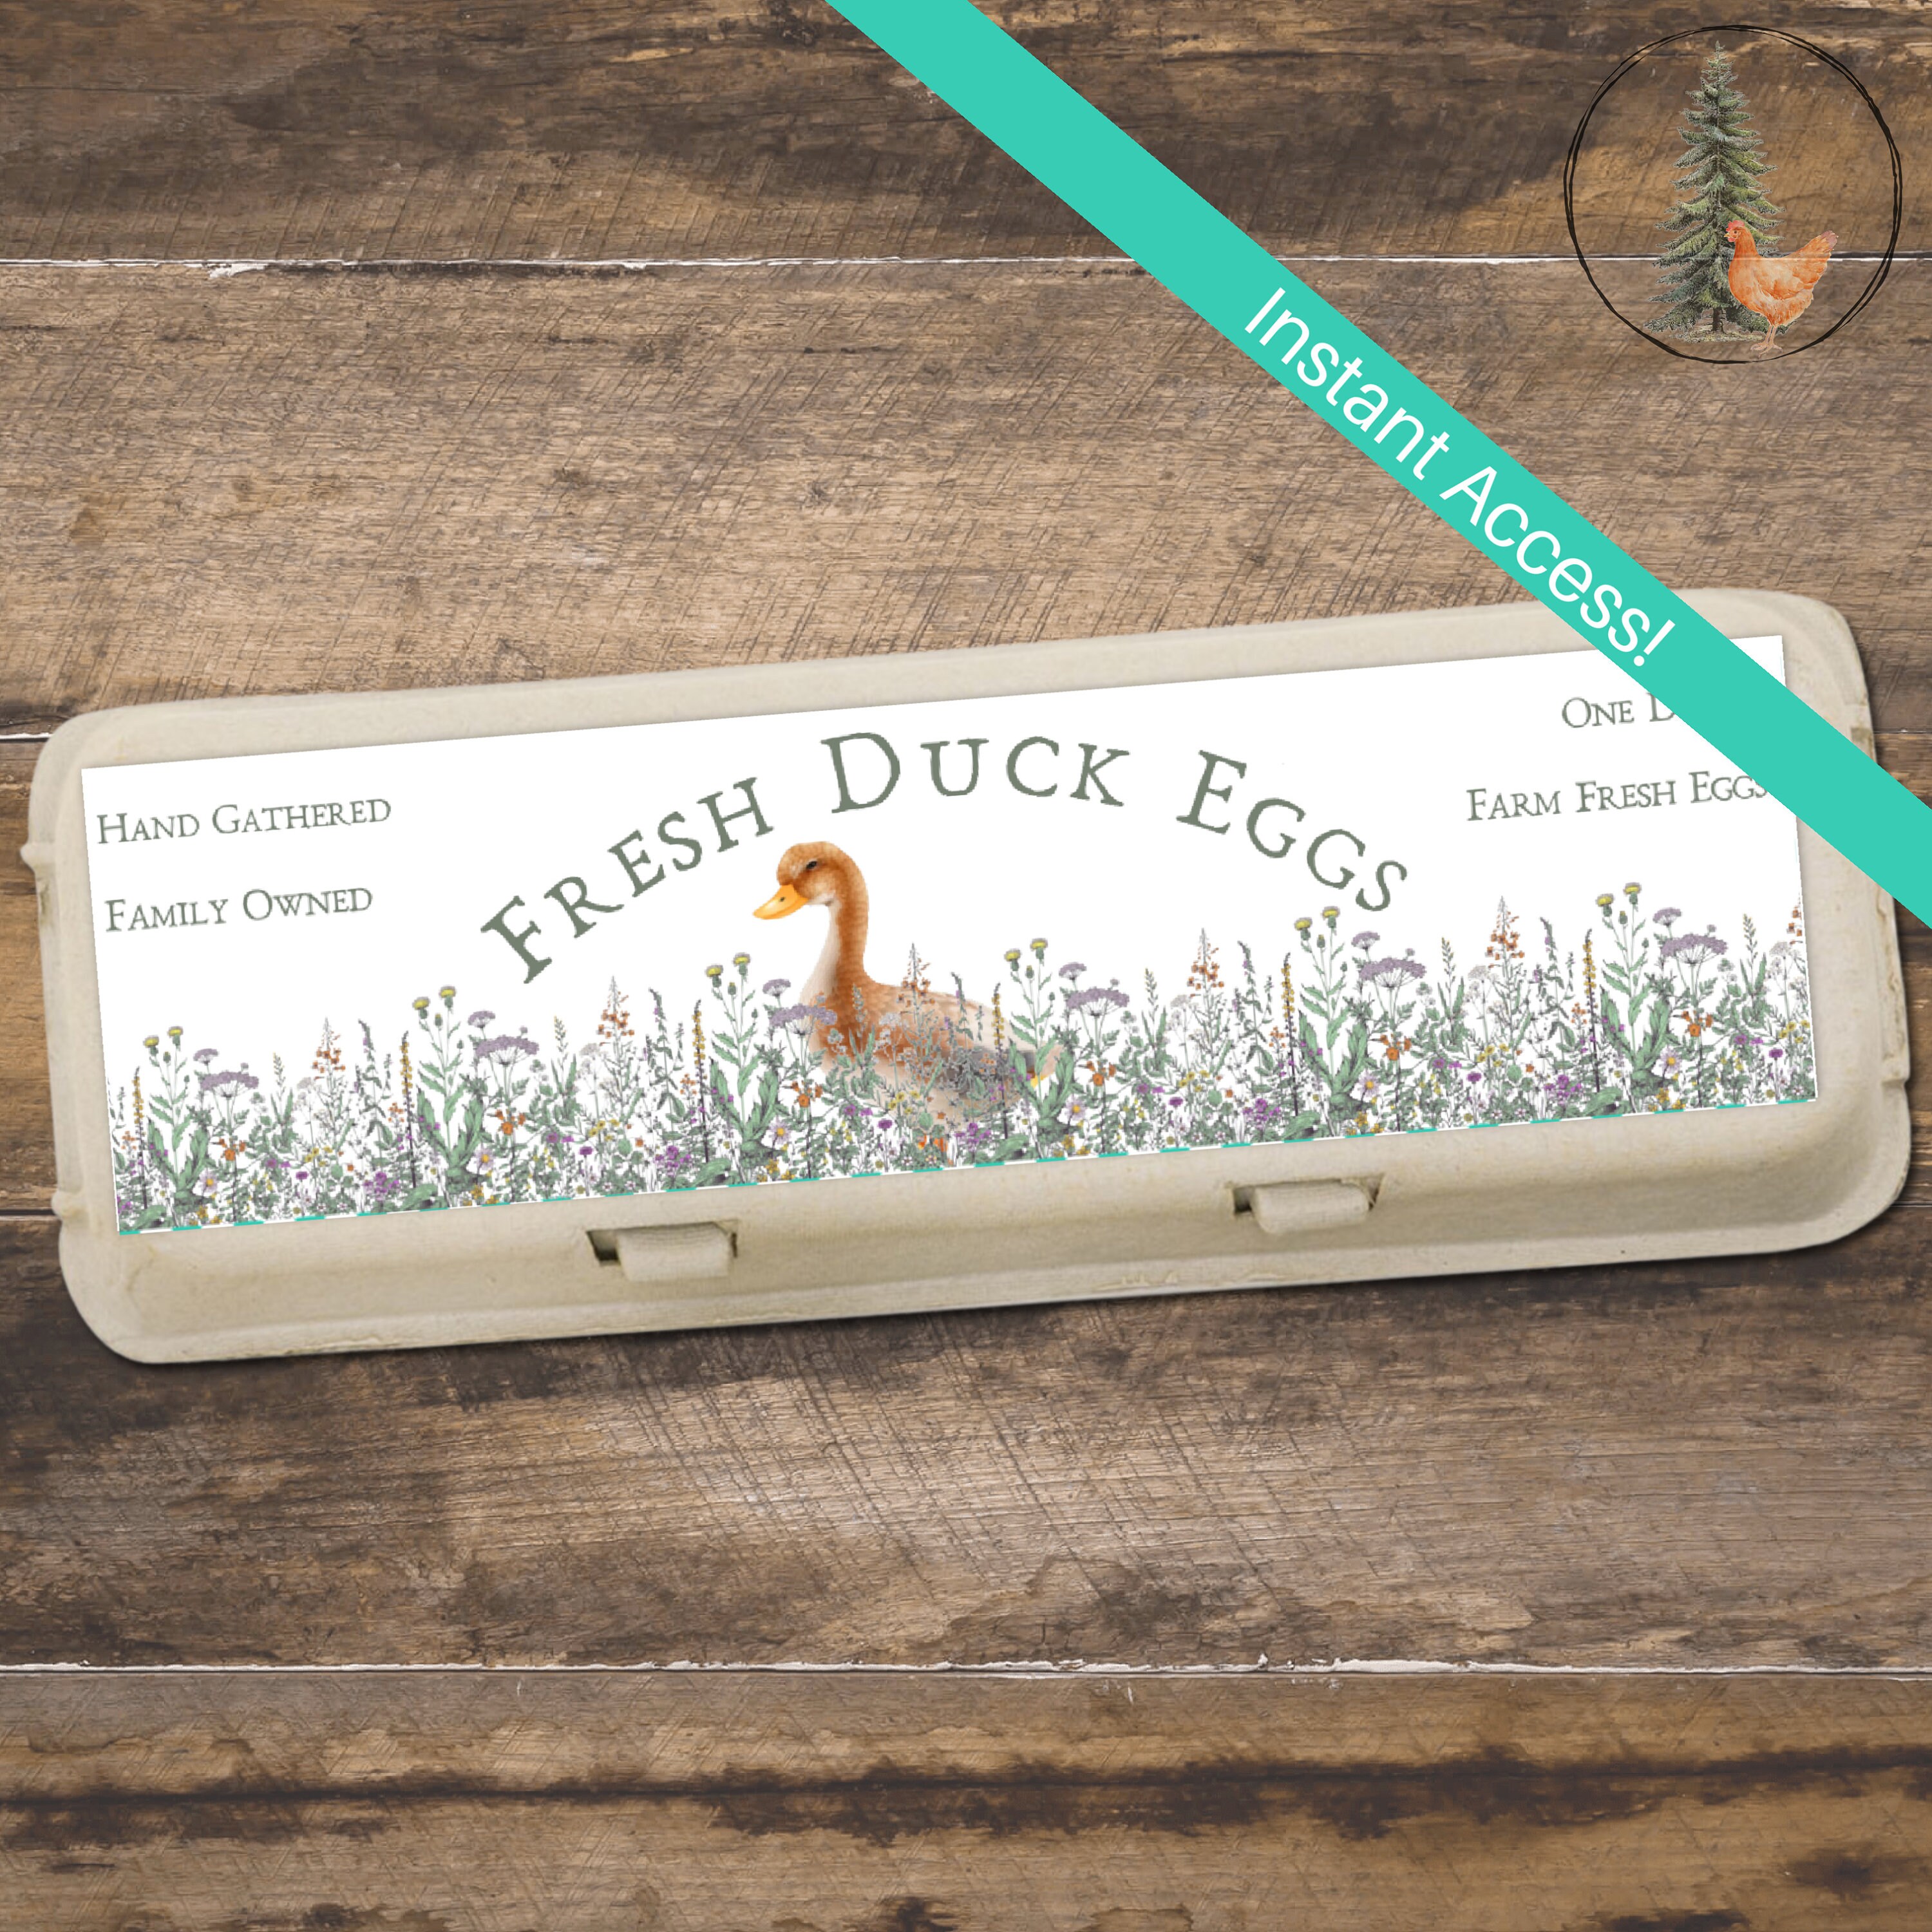 Customizable Vintage Full-Top Label for Egg Cartons